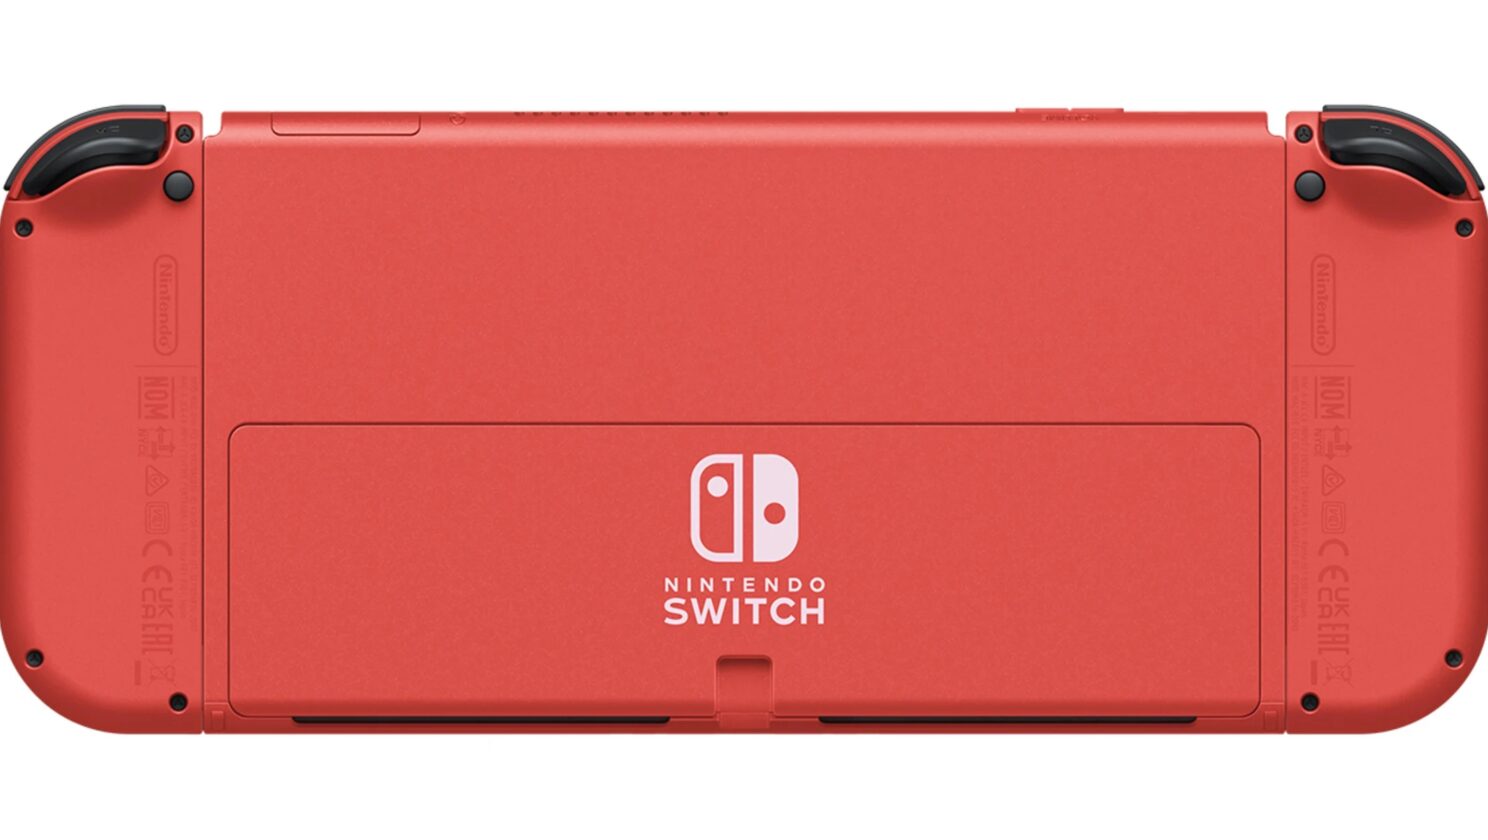 112872-nintendo-switch-oled-model-mario-red-edition-back-1200×675